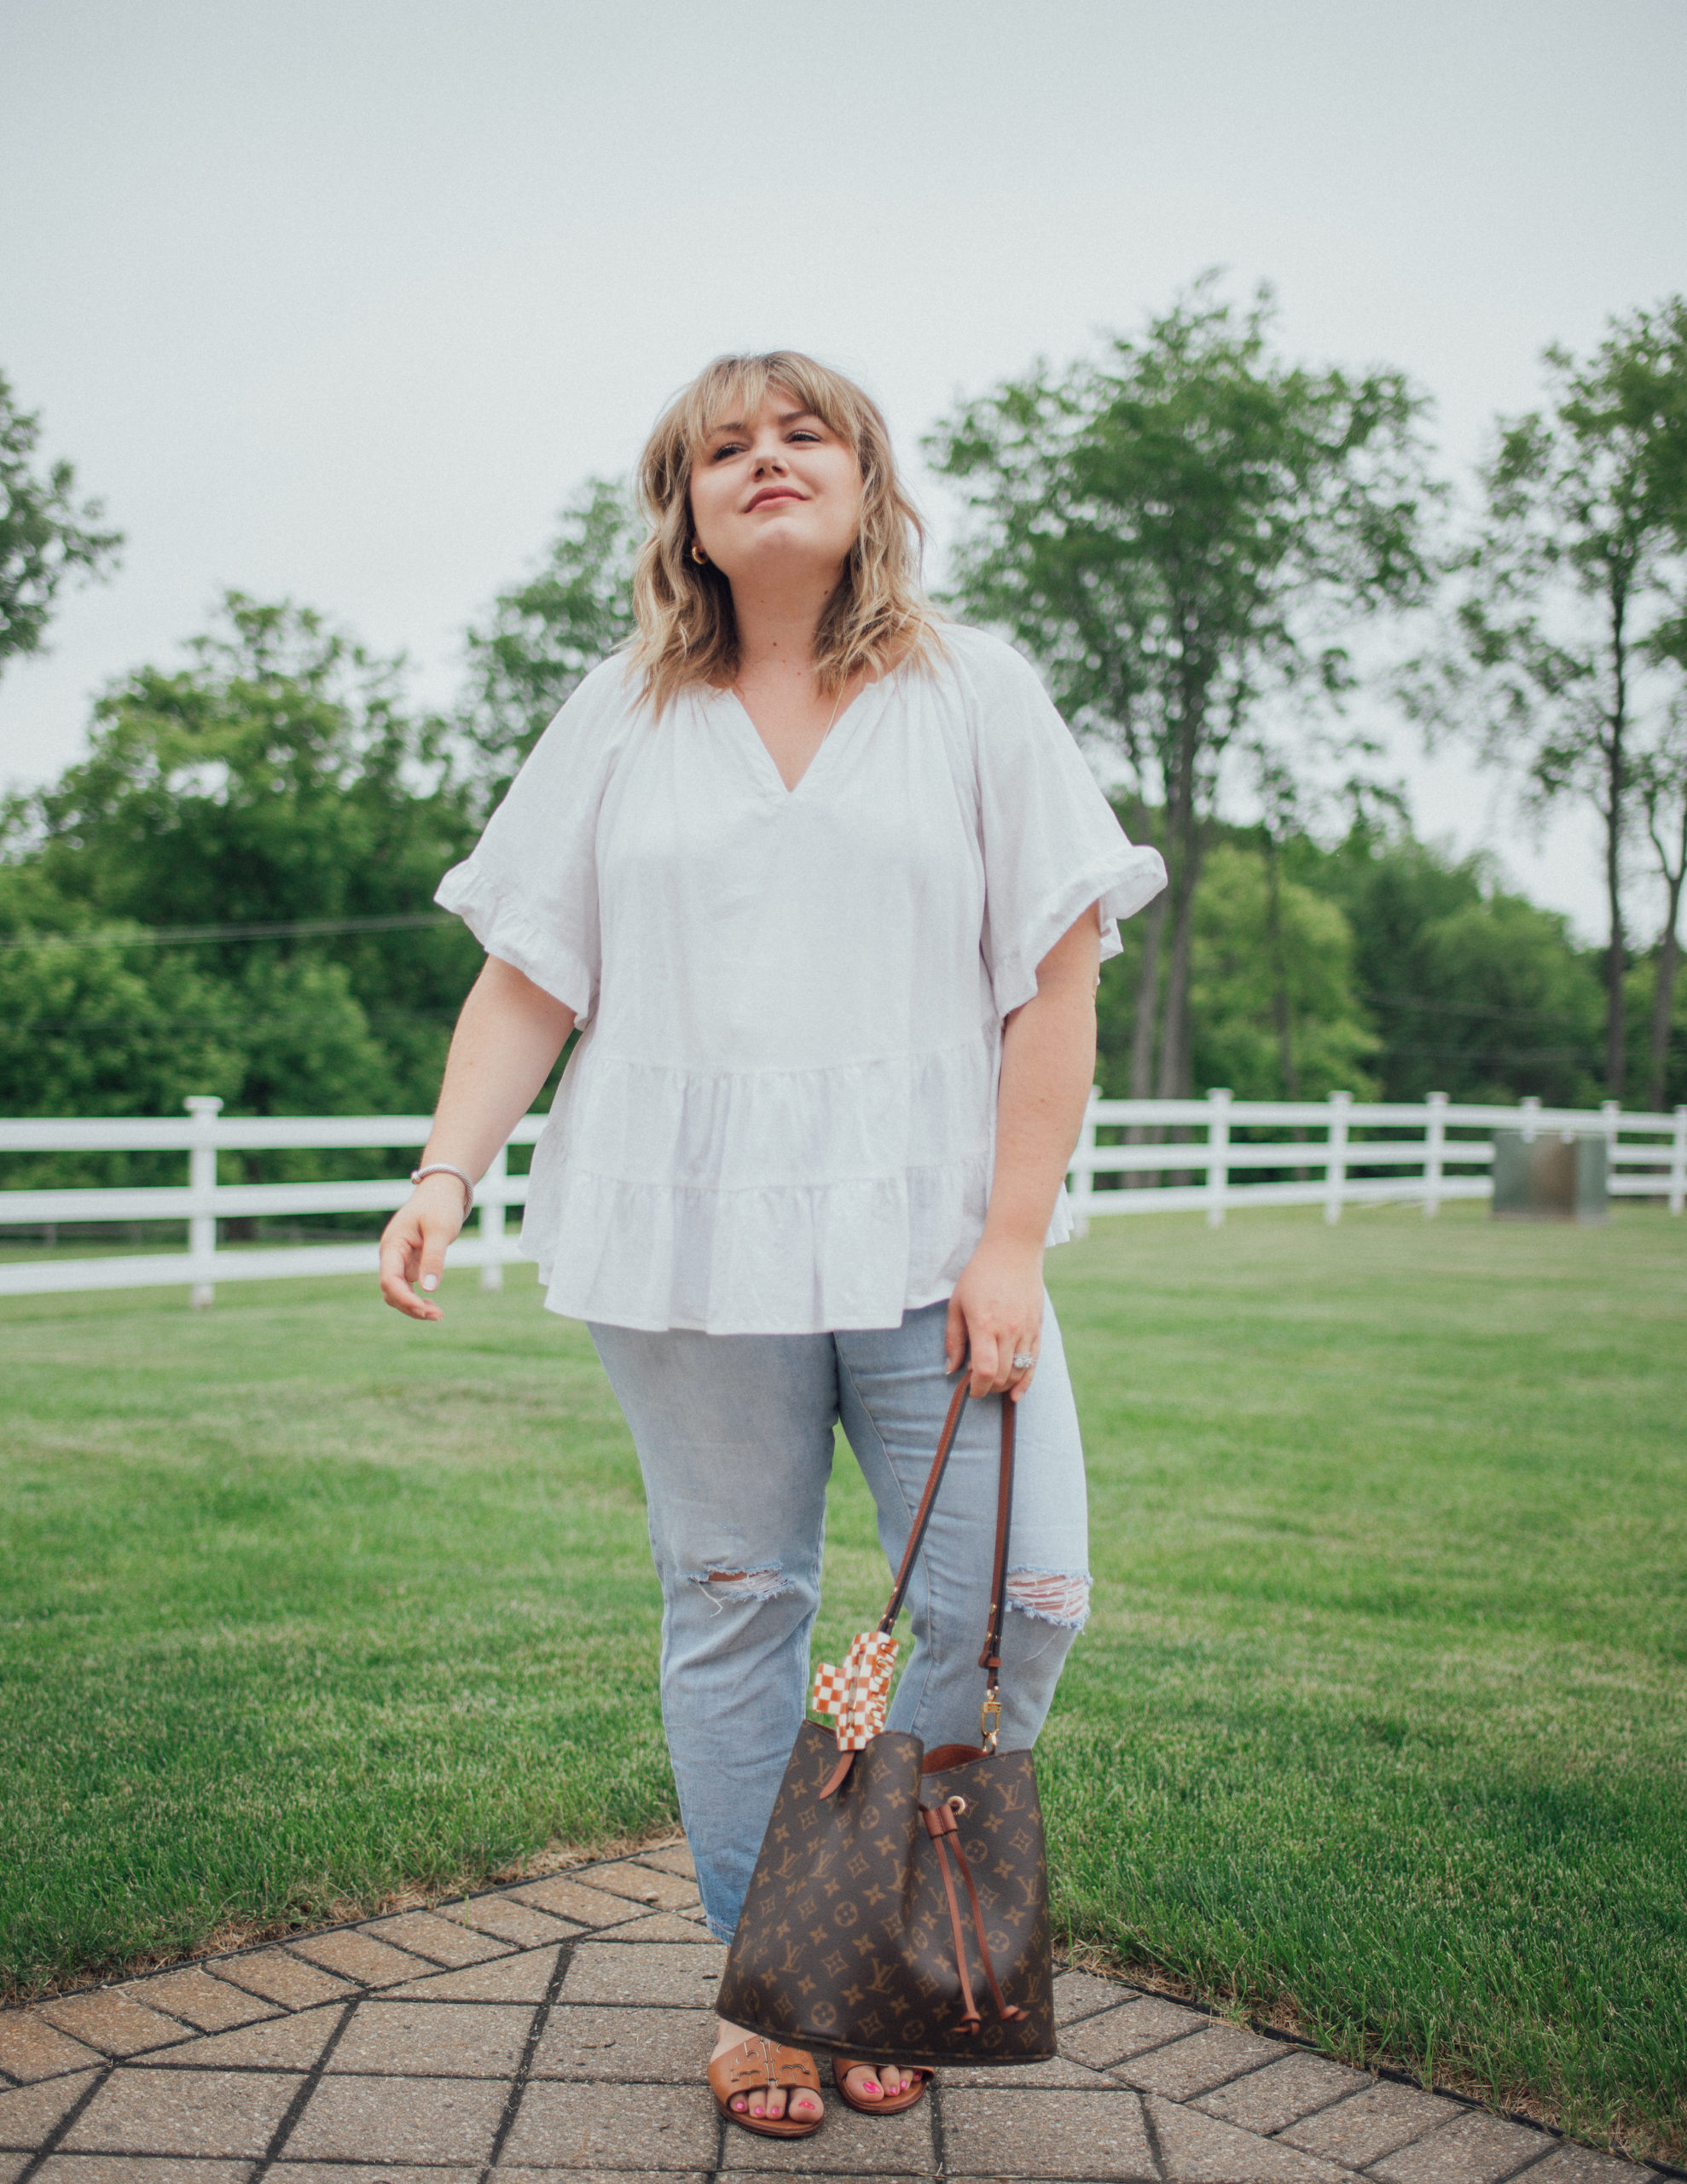 Sharing a roundup of plus size boho tops for summer from different brands. A boho top is flowy, light and looks great with jeans! 